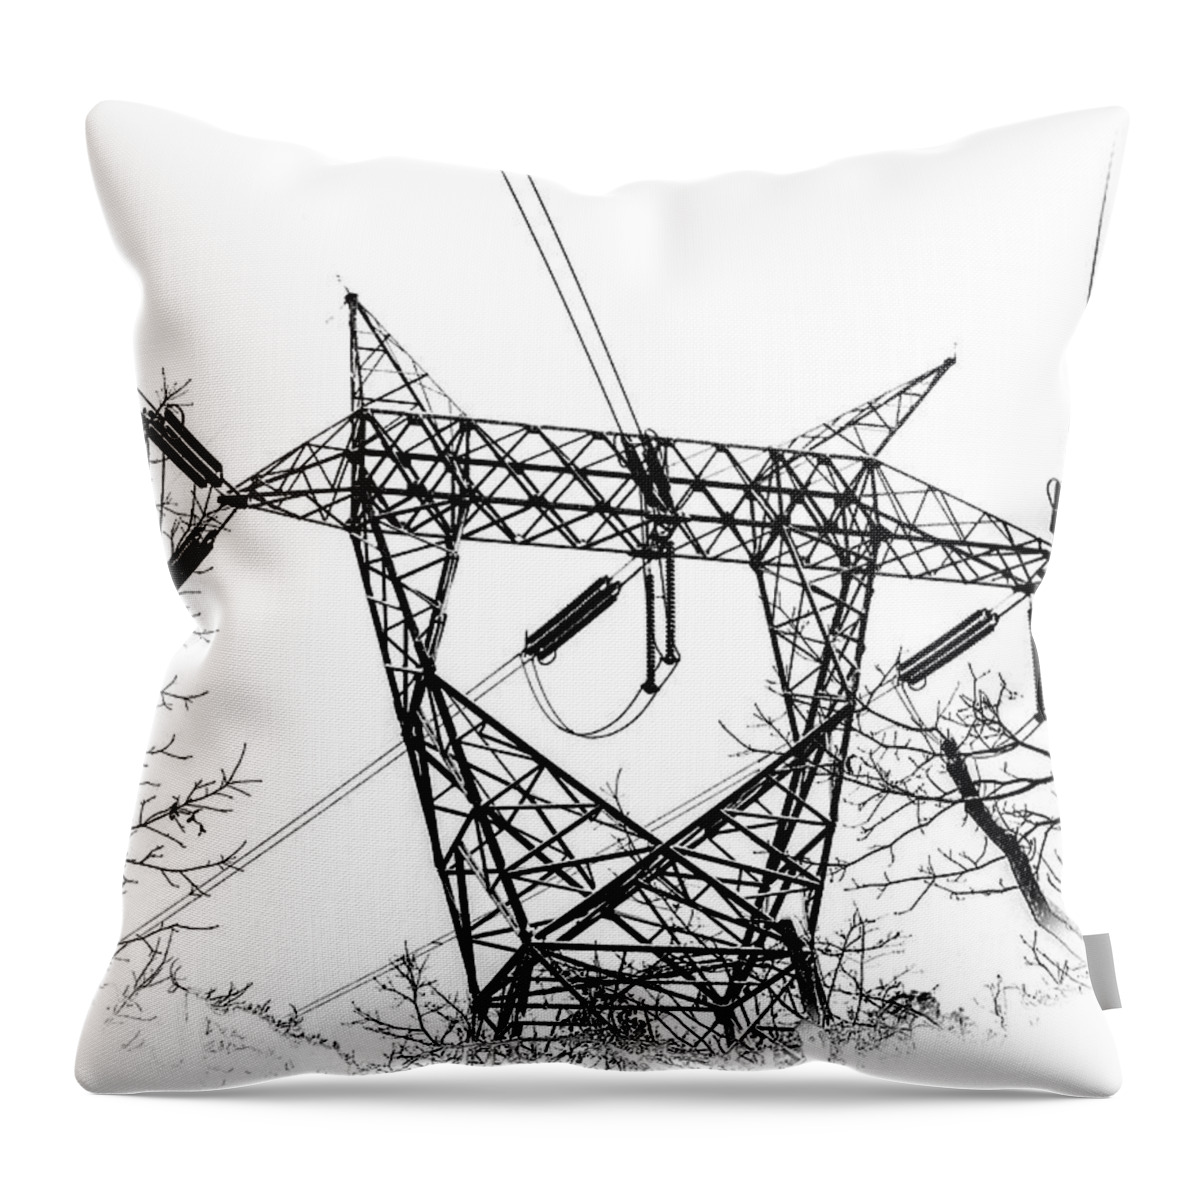 Power Lines Throw Pillow featuring the photograph Power Lines by Louis Dallara